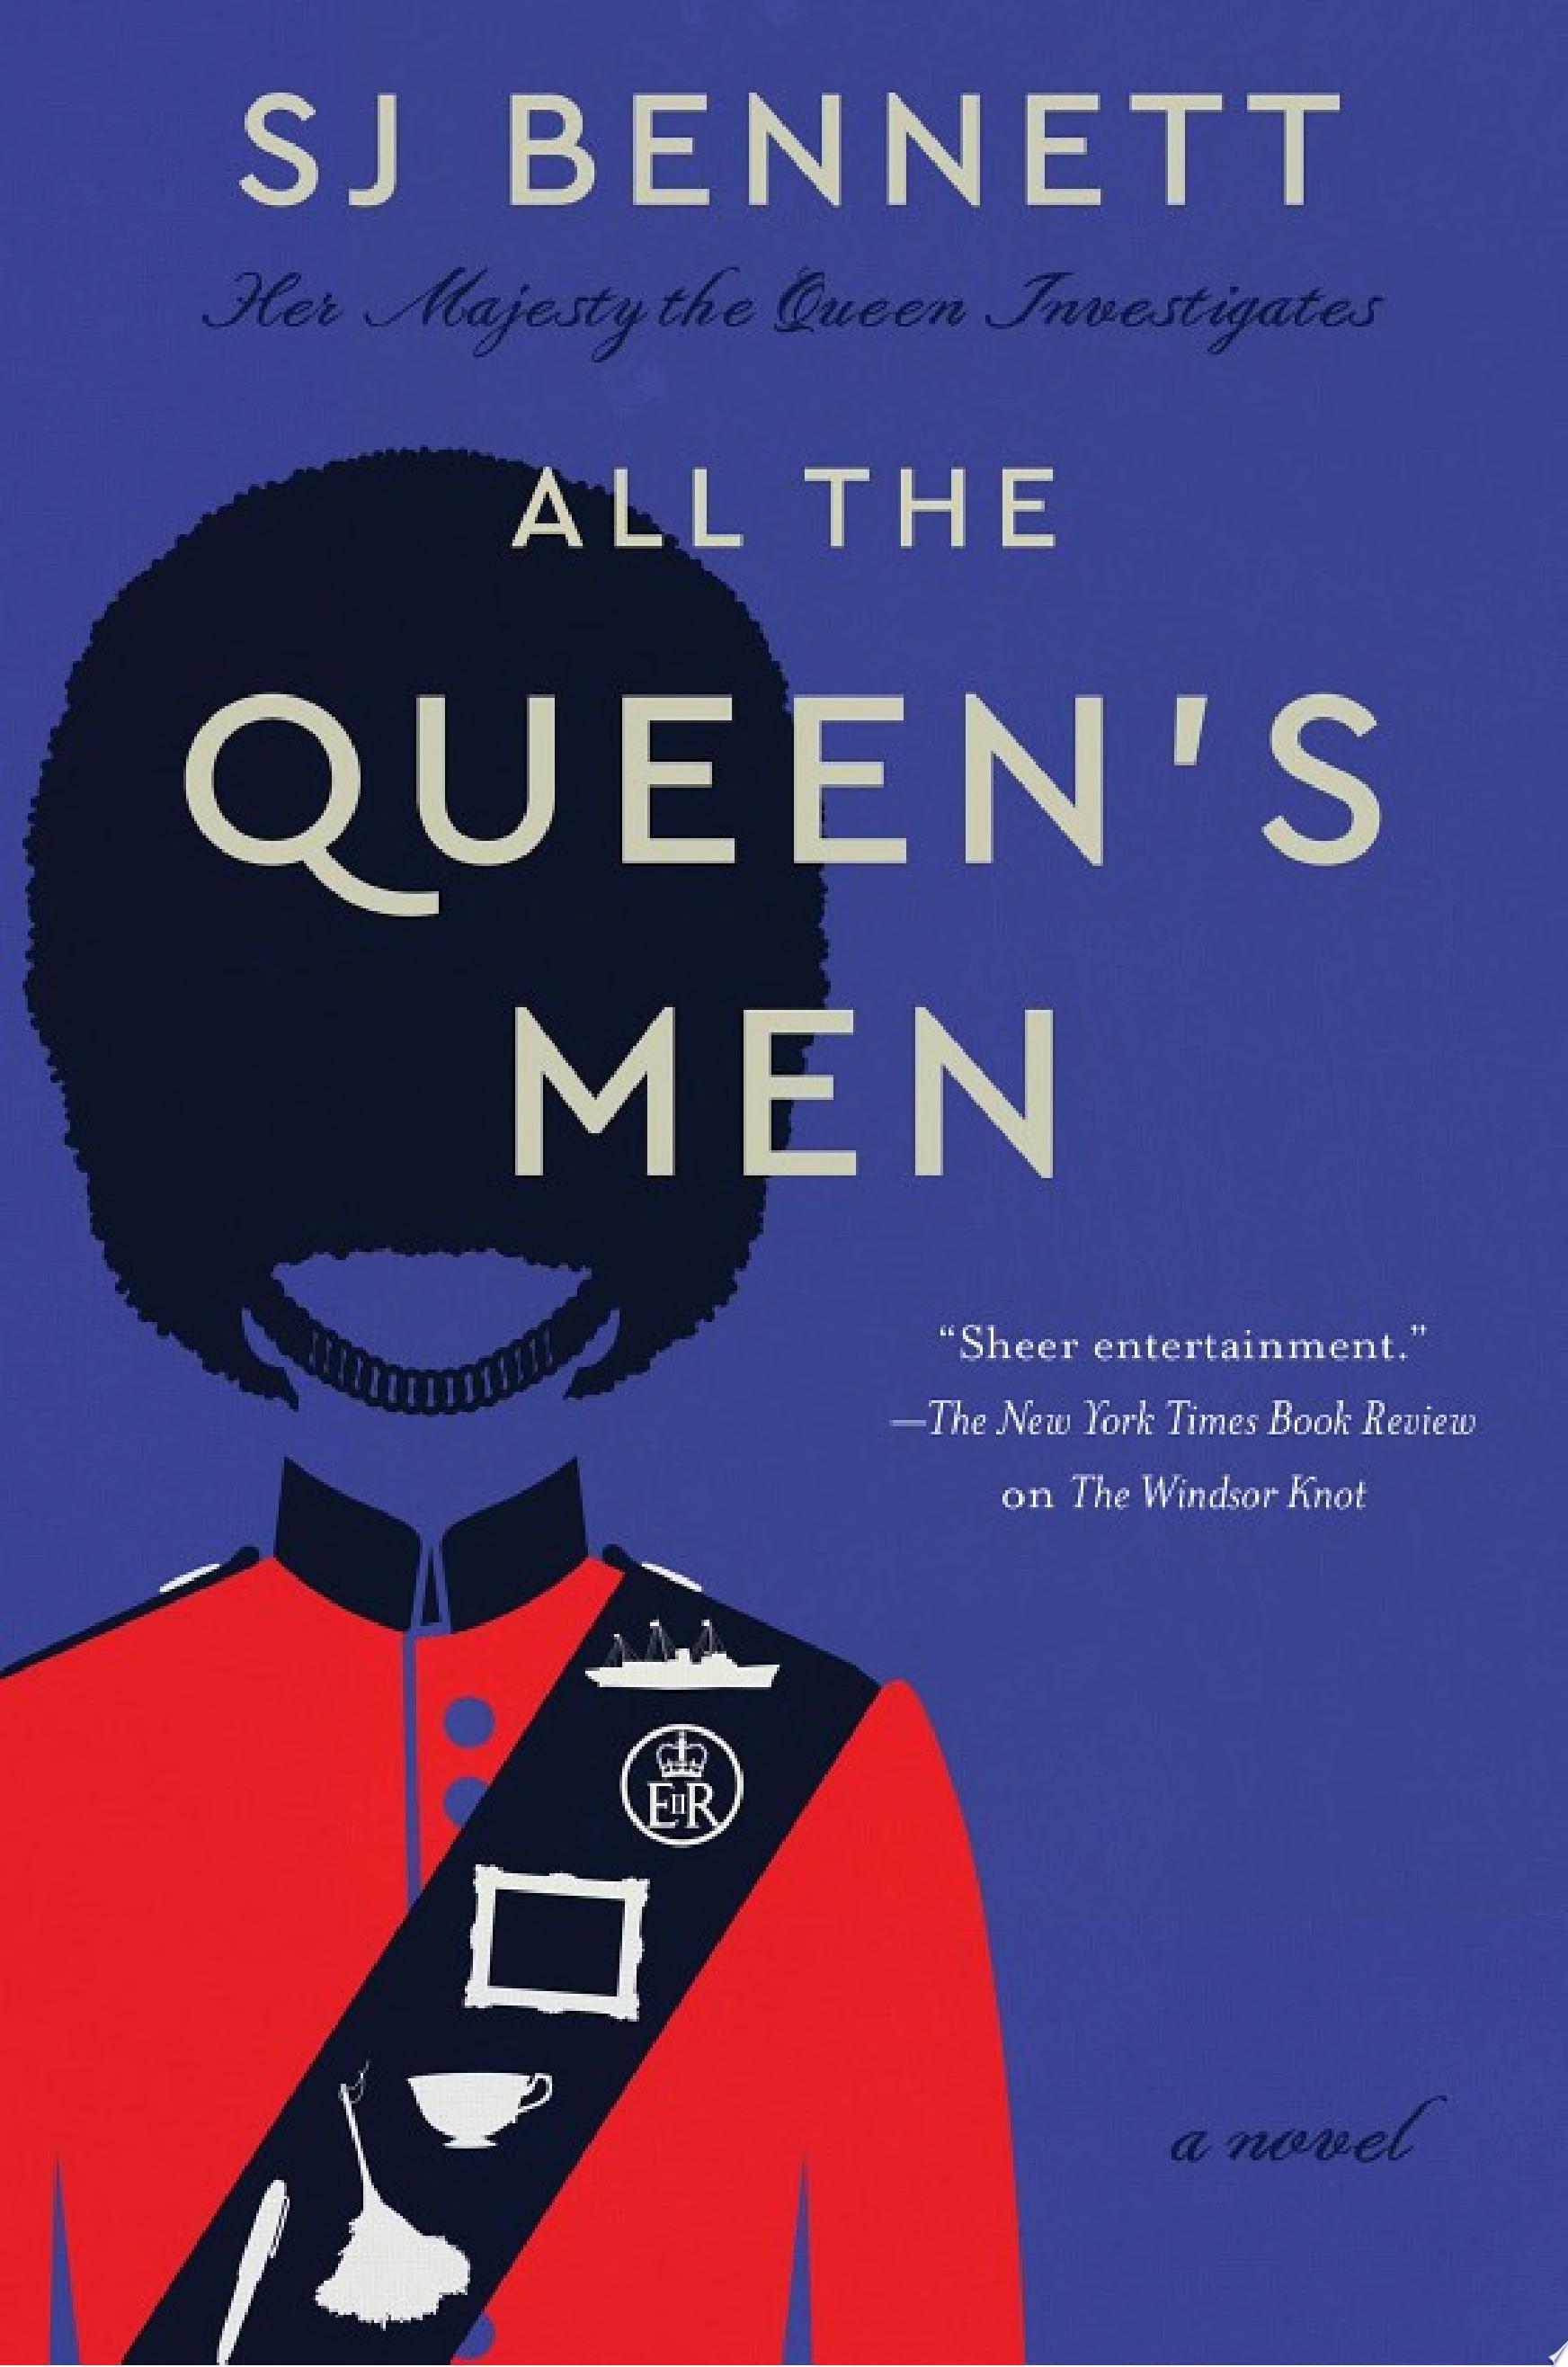 Image for "All the Queen&#039;s Men"